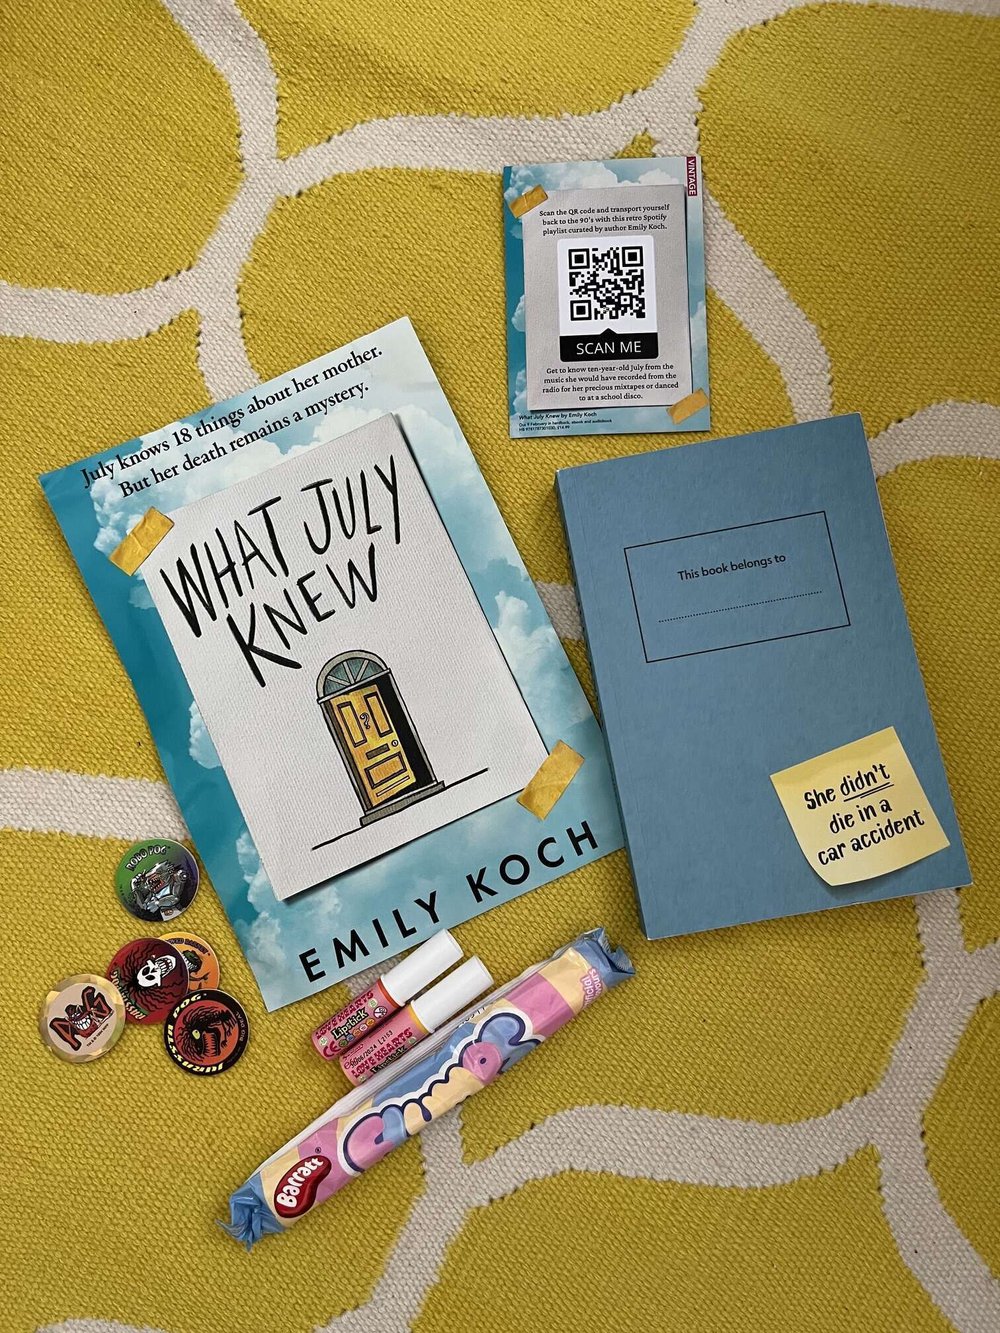 Proofs of What July Knew have been sent out with 90s gifts